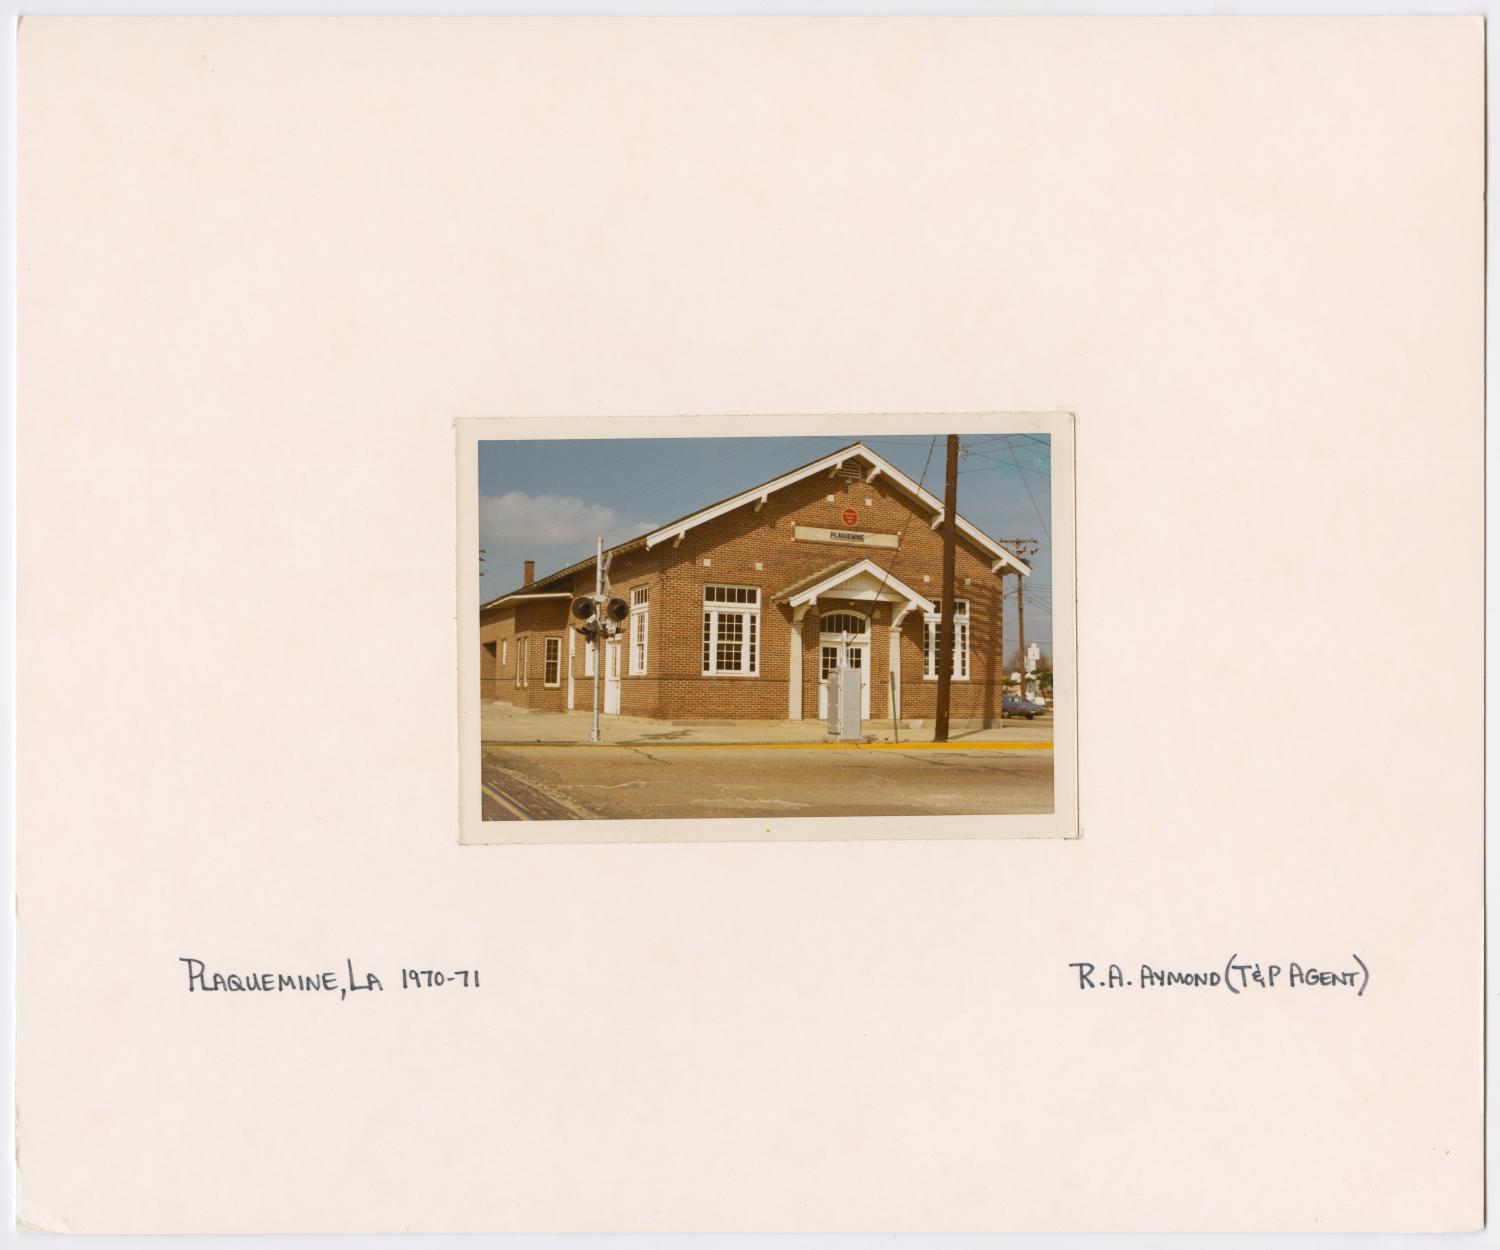 Images of Texas & Pacific Stations and Structures in Plaquemine, LA